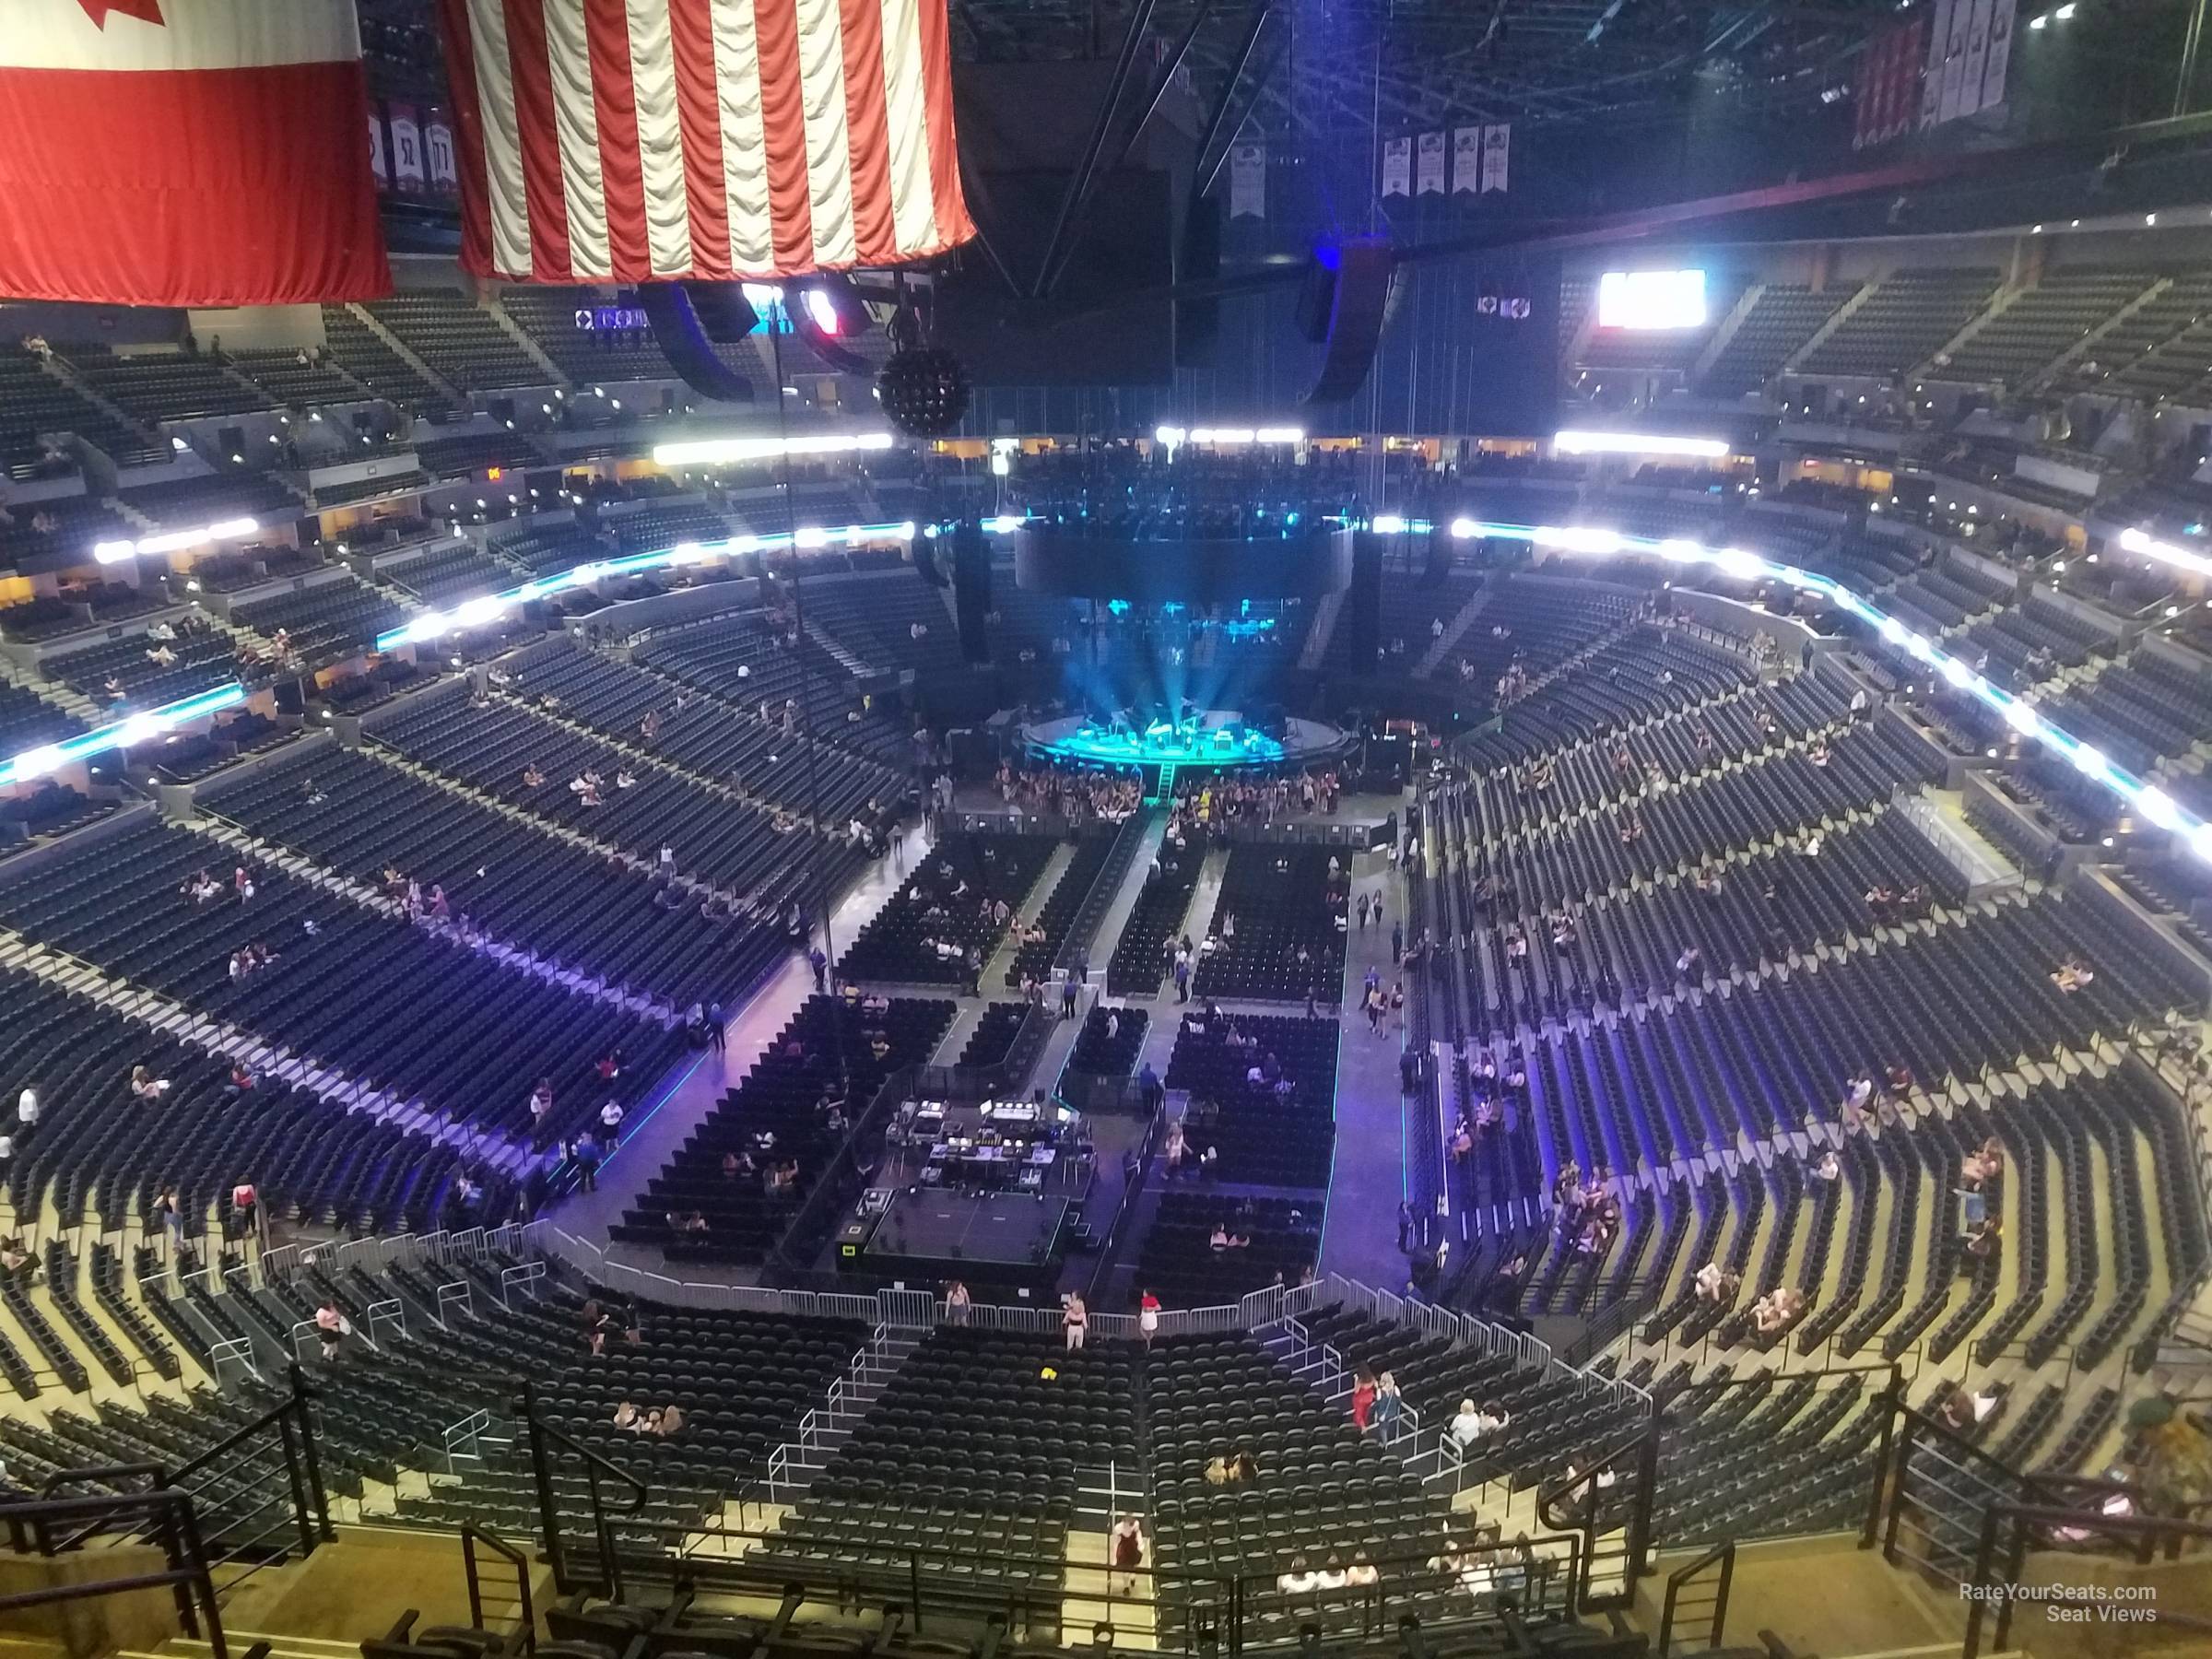 Section 320 at Ball Arena for Concerts